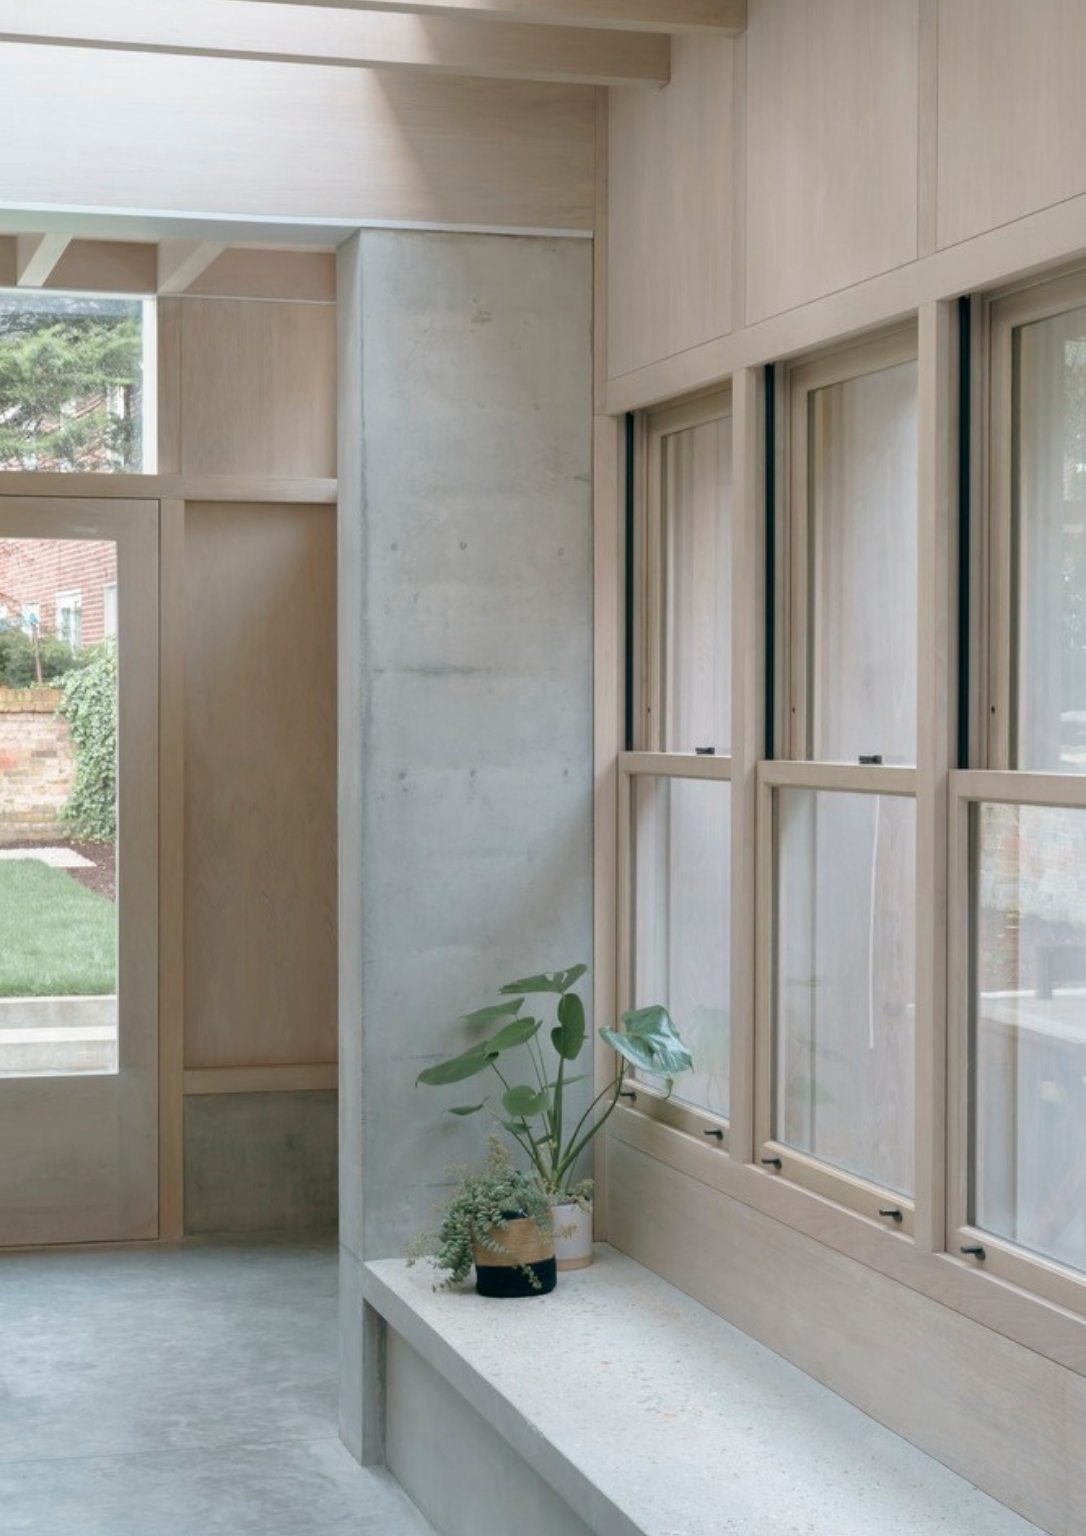 light wooden walls with paned windows